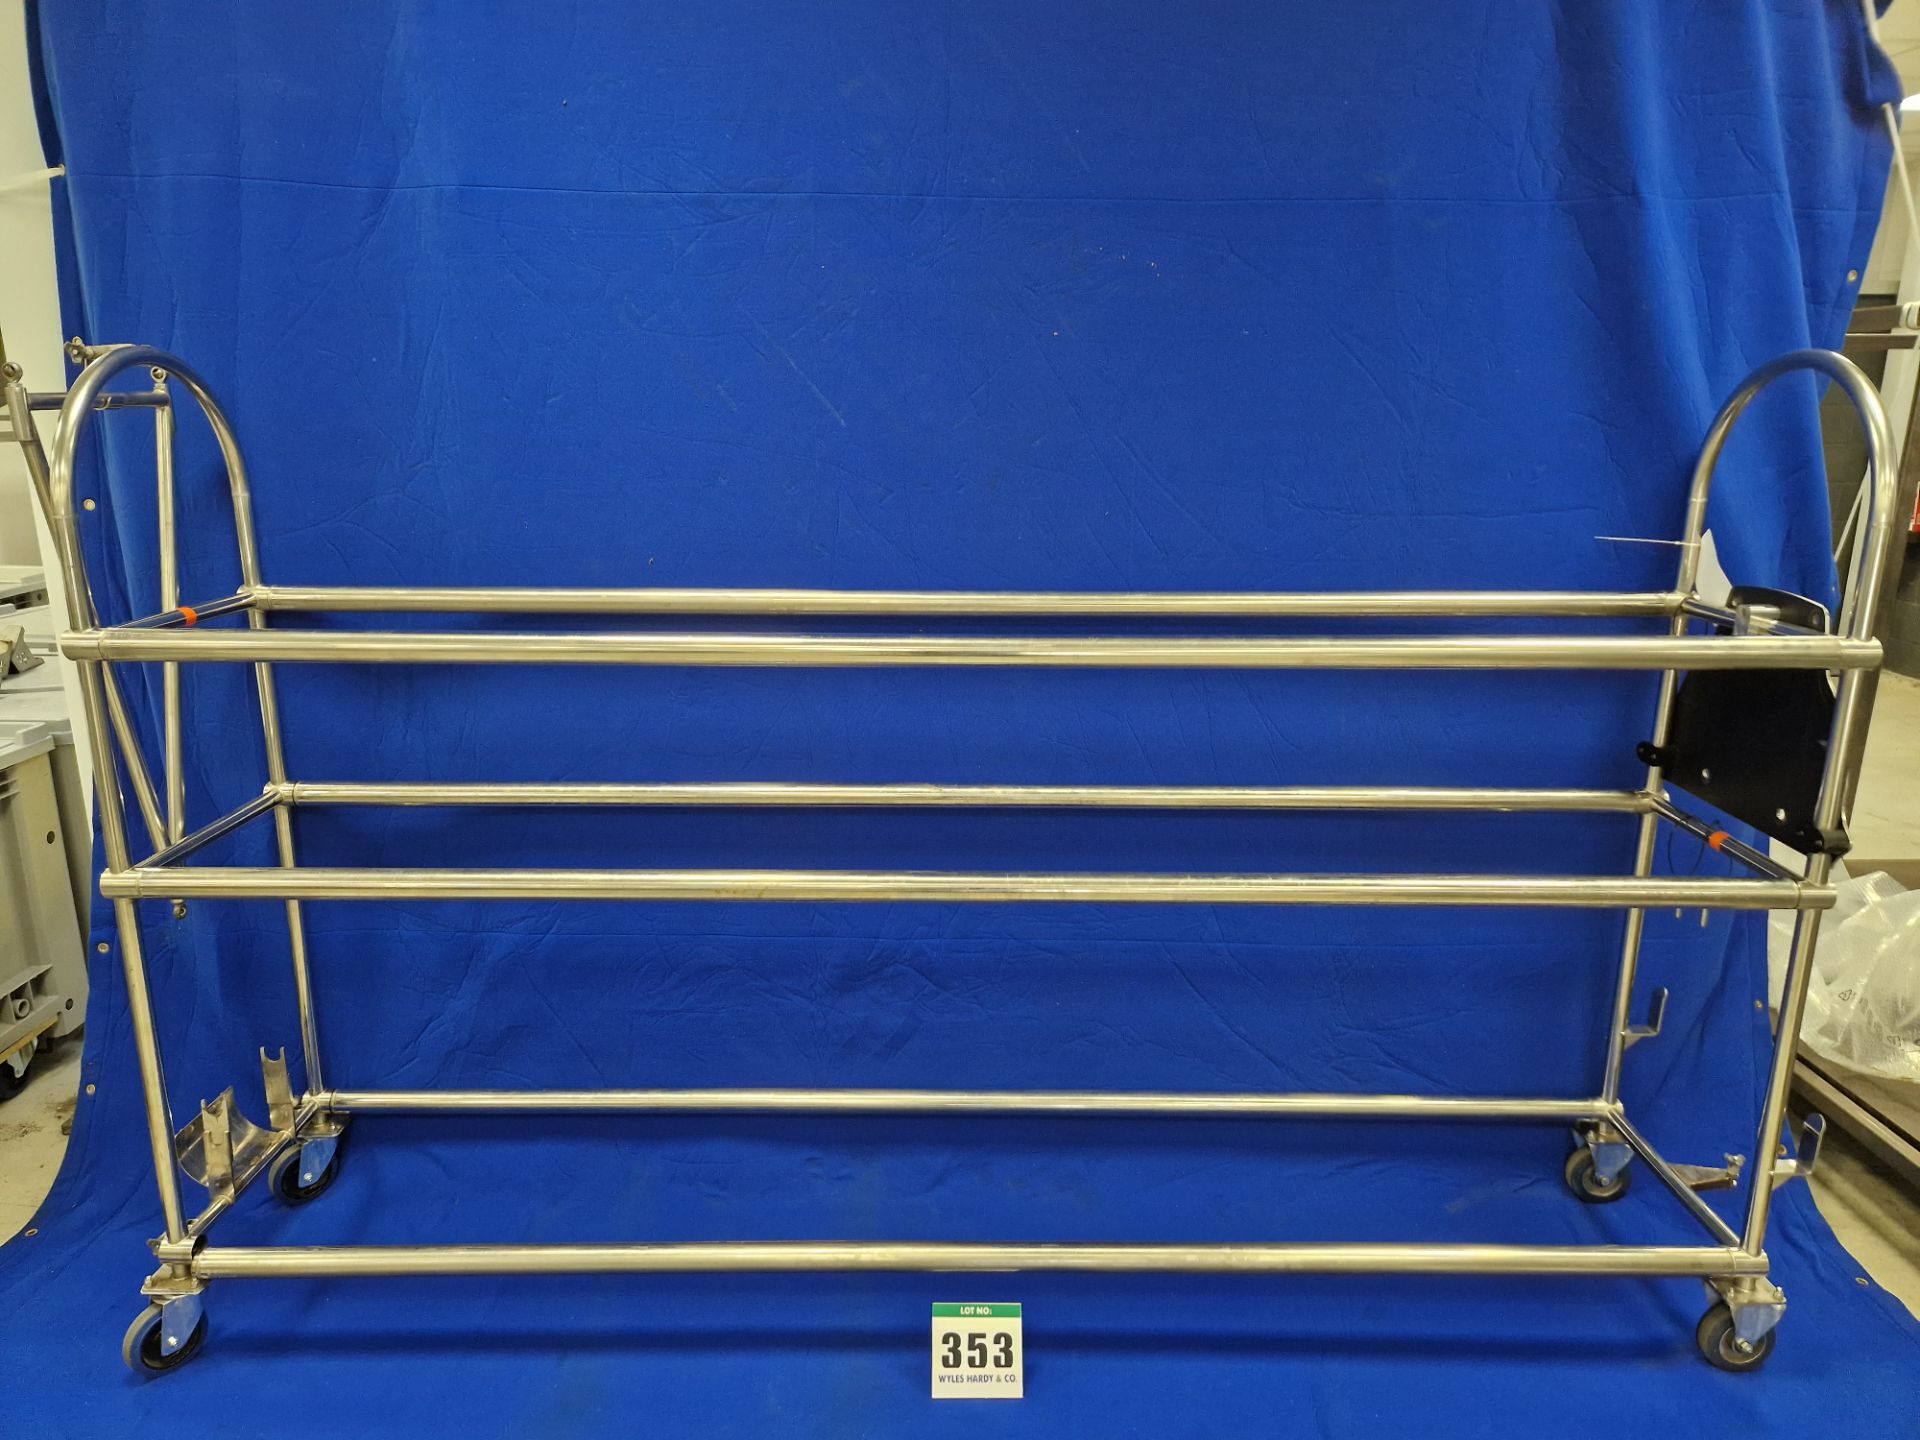 One Stainless Steel Castor mounted Sectional 3-Tier Grid Trolley with A Soft Transportation and